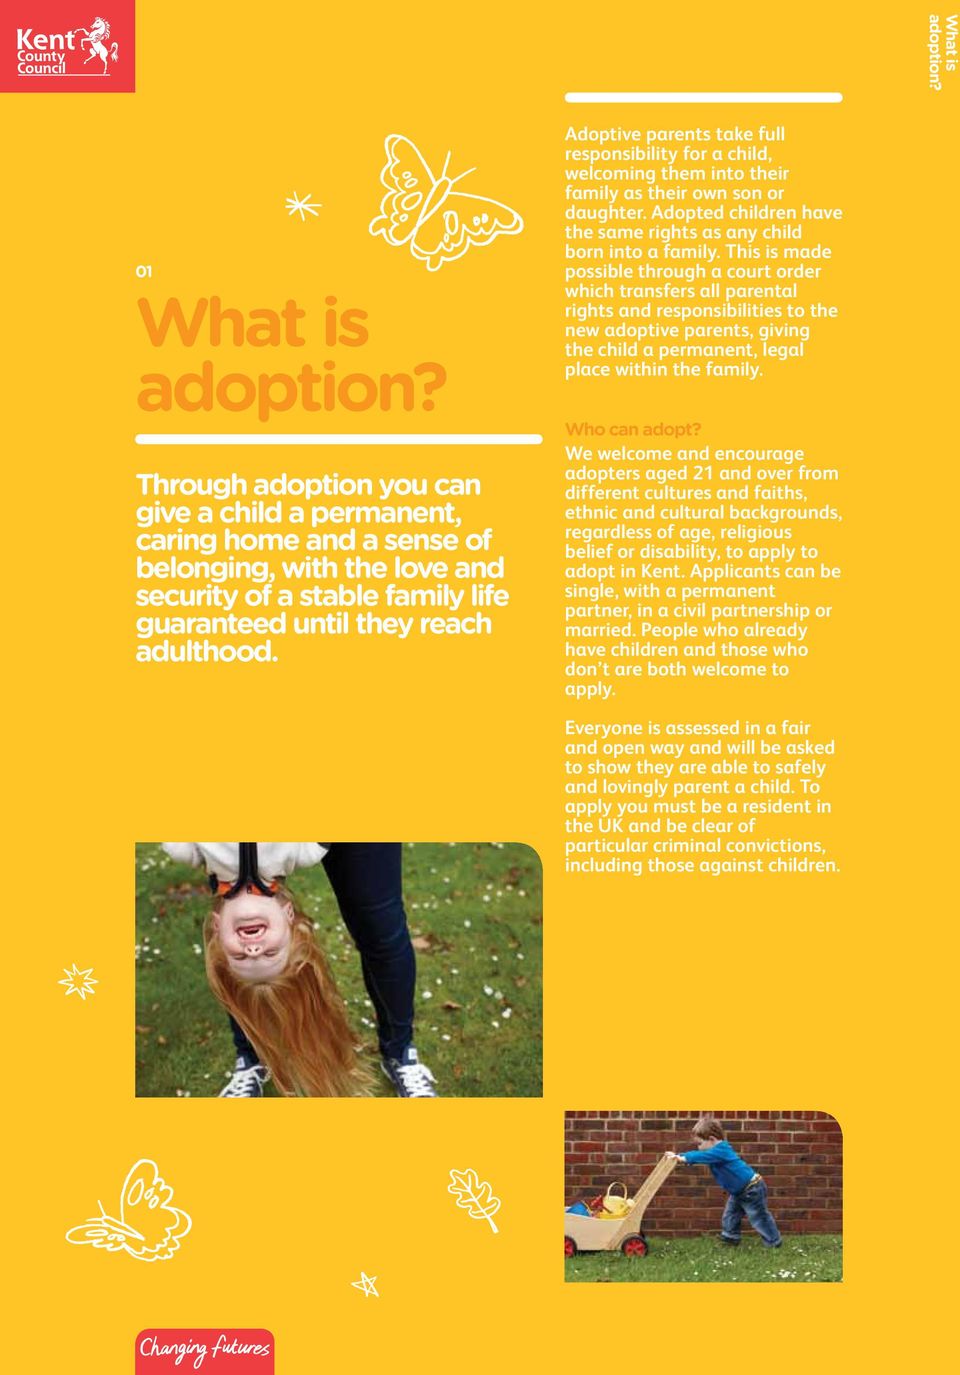 Adoptive parents take full responsibility for a child, welcoming them into their family as their own son or daughter. Adopted children have the same rights as any child born into a family.